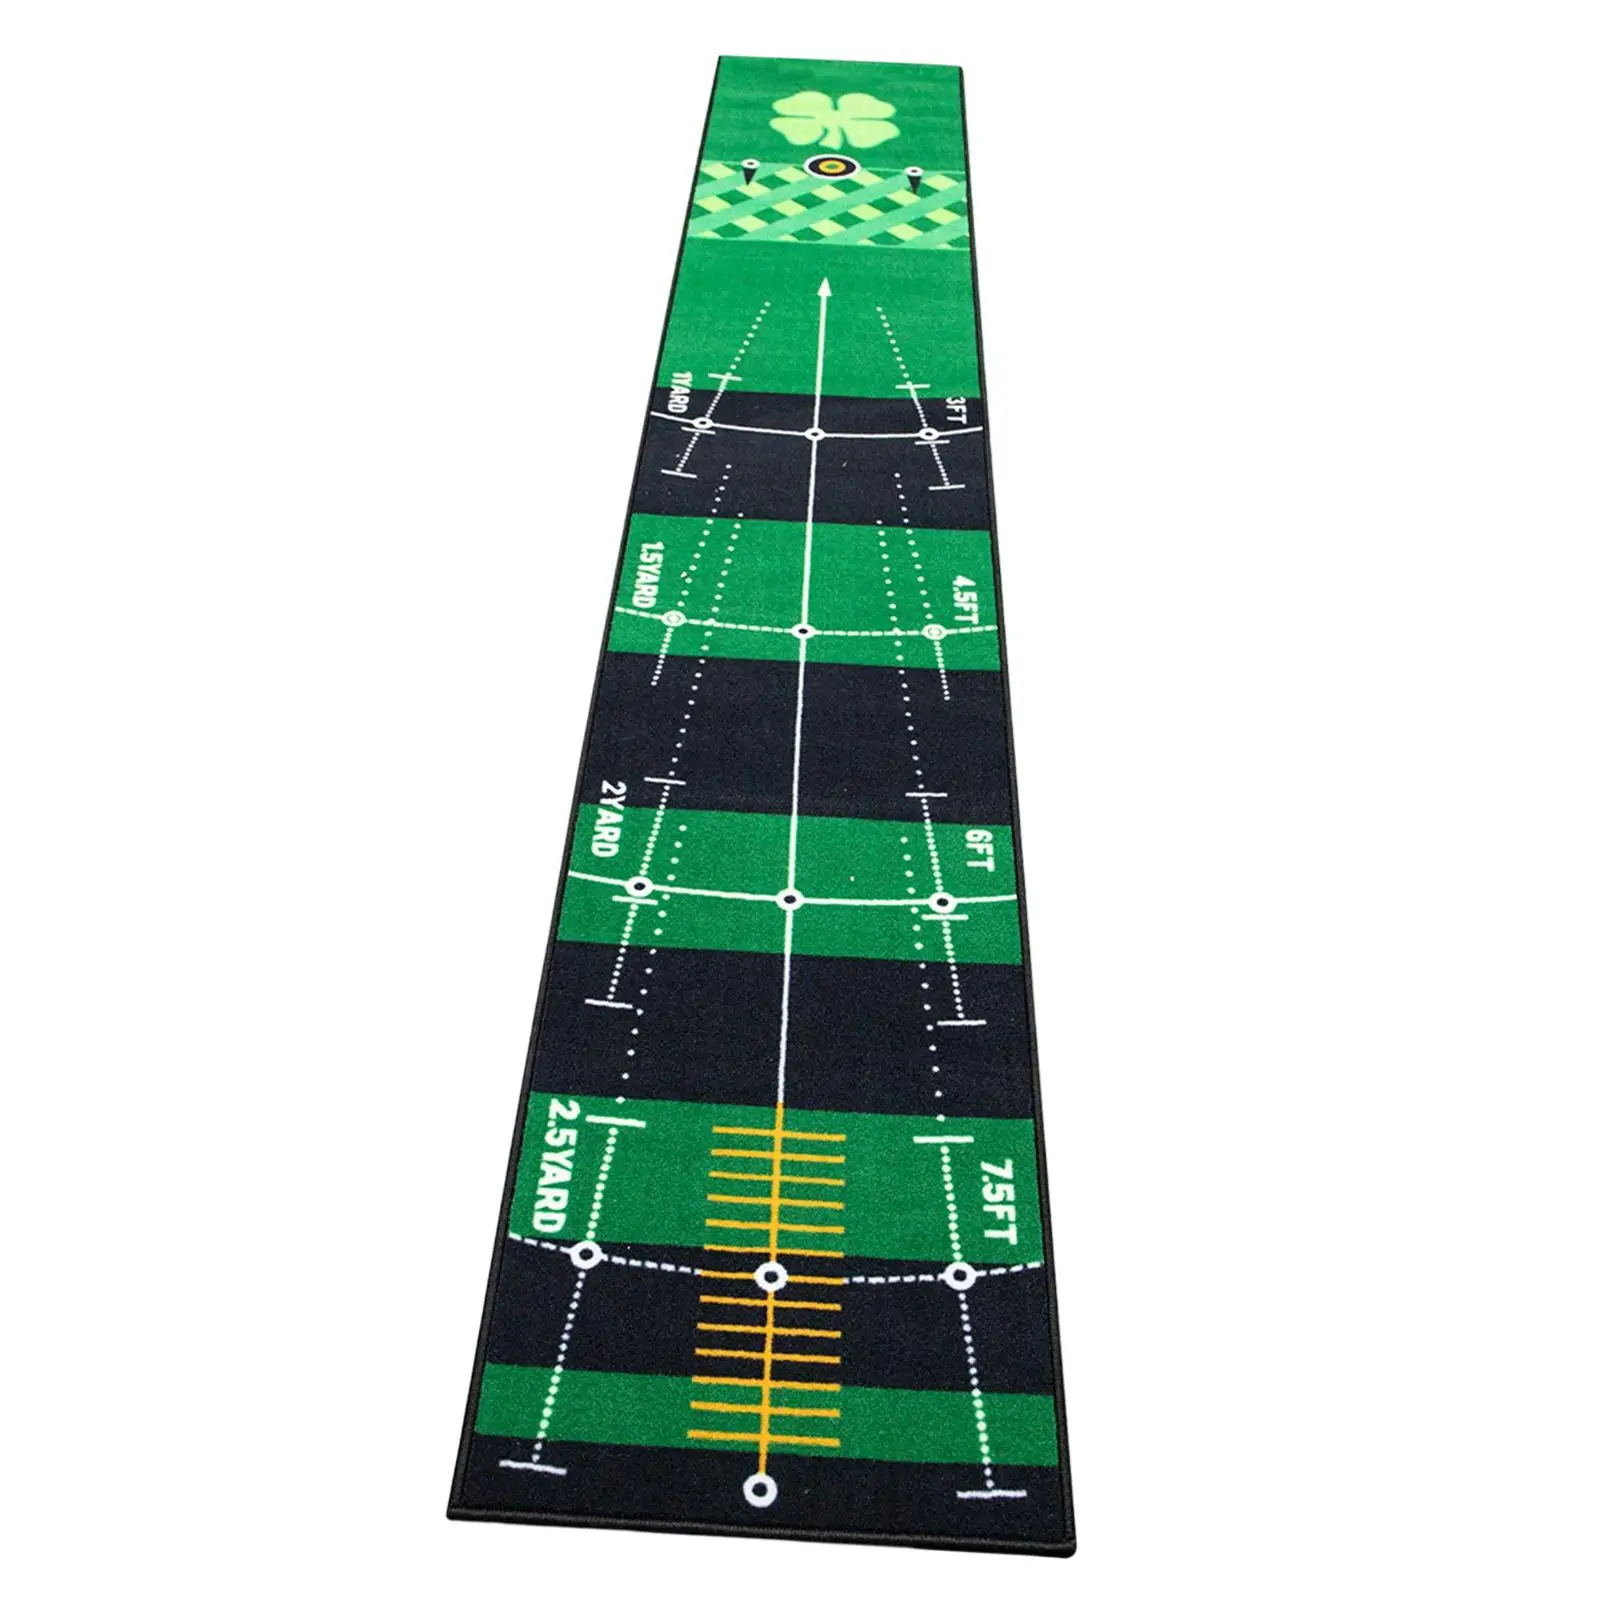 Golf Putting Mat Portable Indoor Putting Green Practice Training Aid for Home